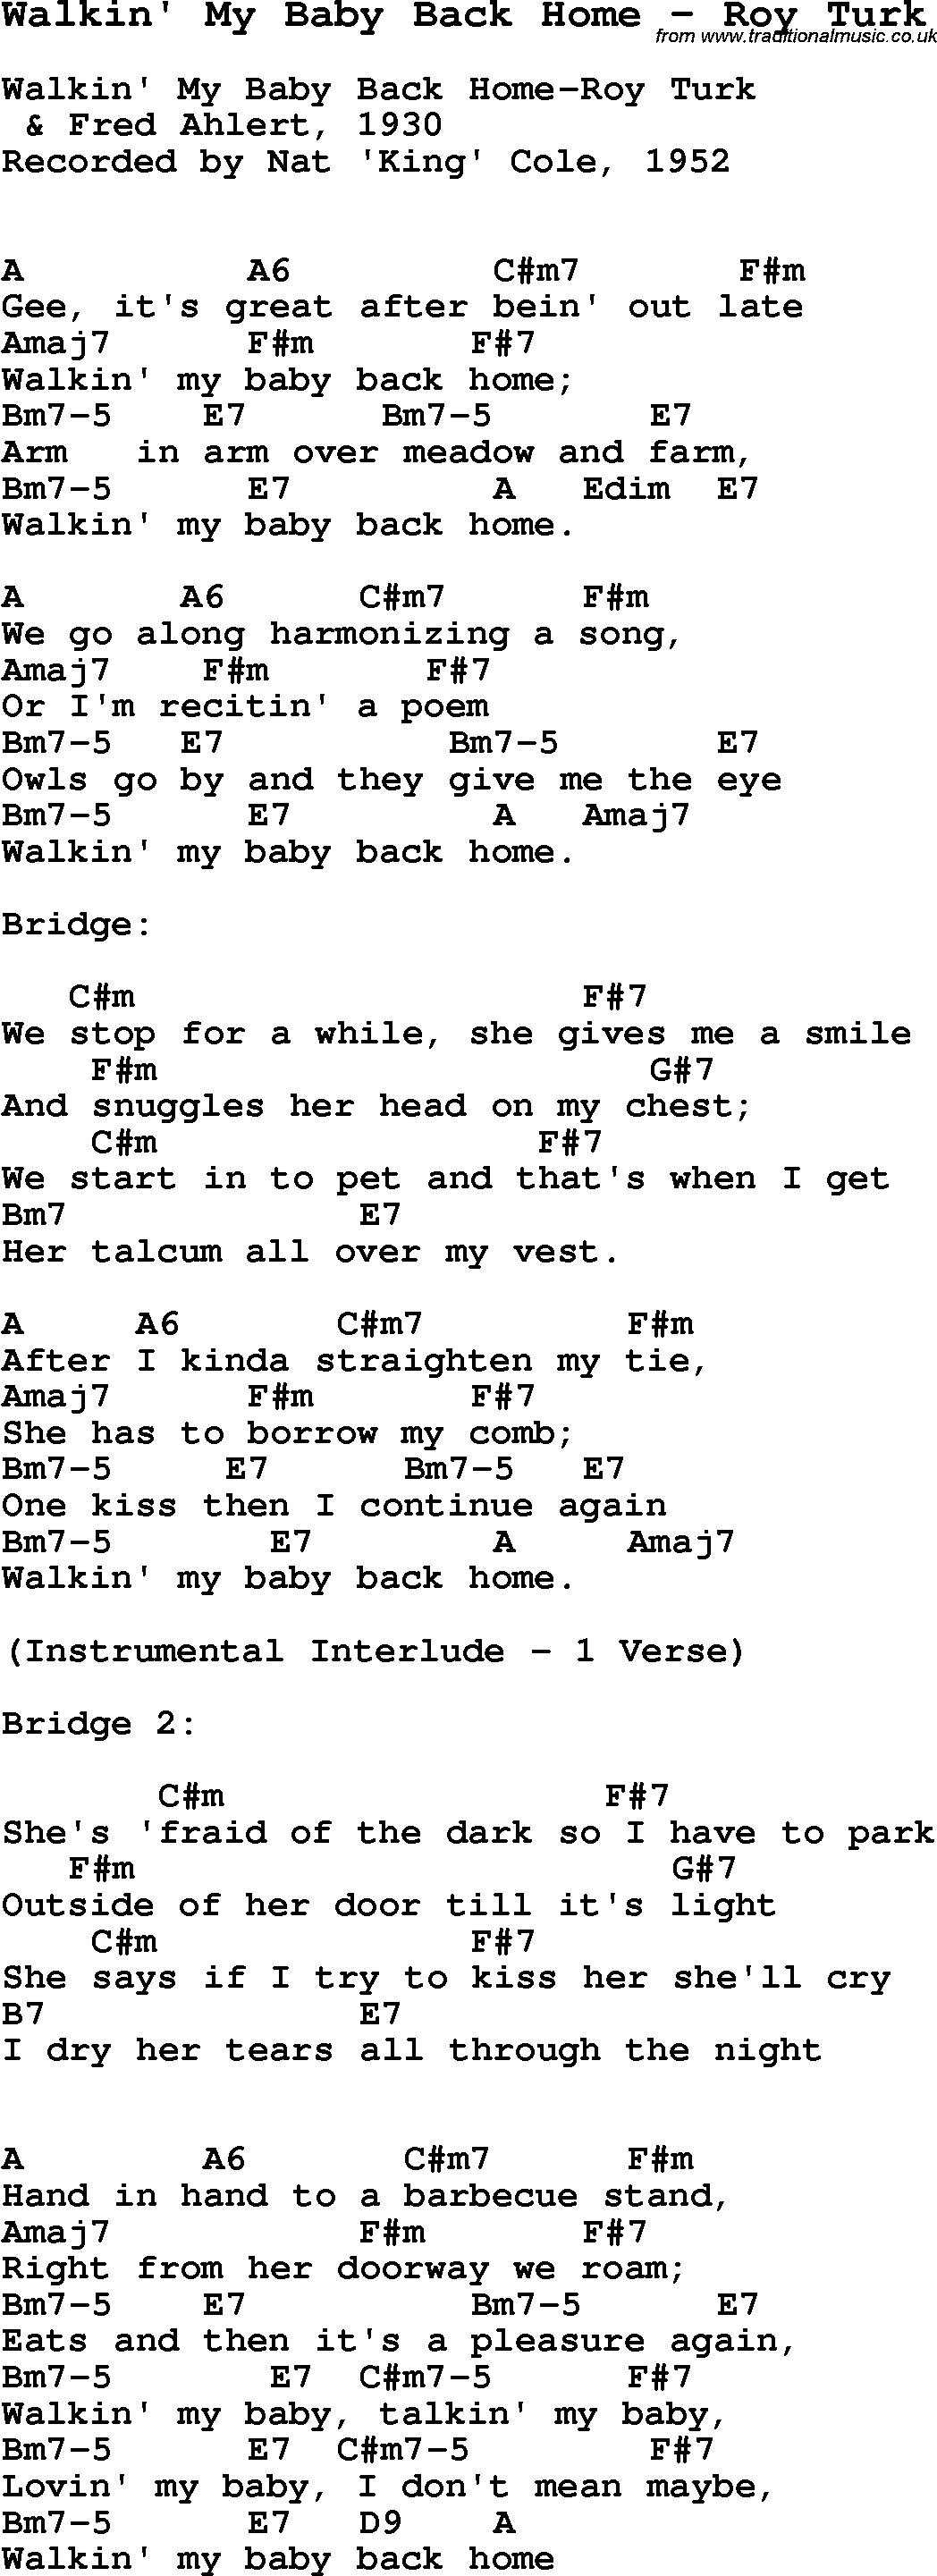 Song Walkin' My Baby Back Home by Roy Turk, with lyrics for vocal performance and accompaniment chords for Ukulele, Guitar Banjo etc.